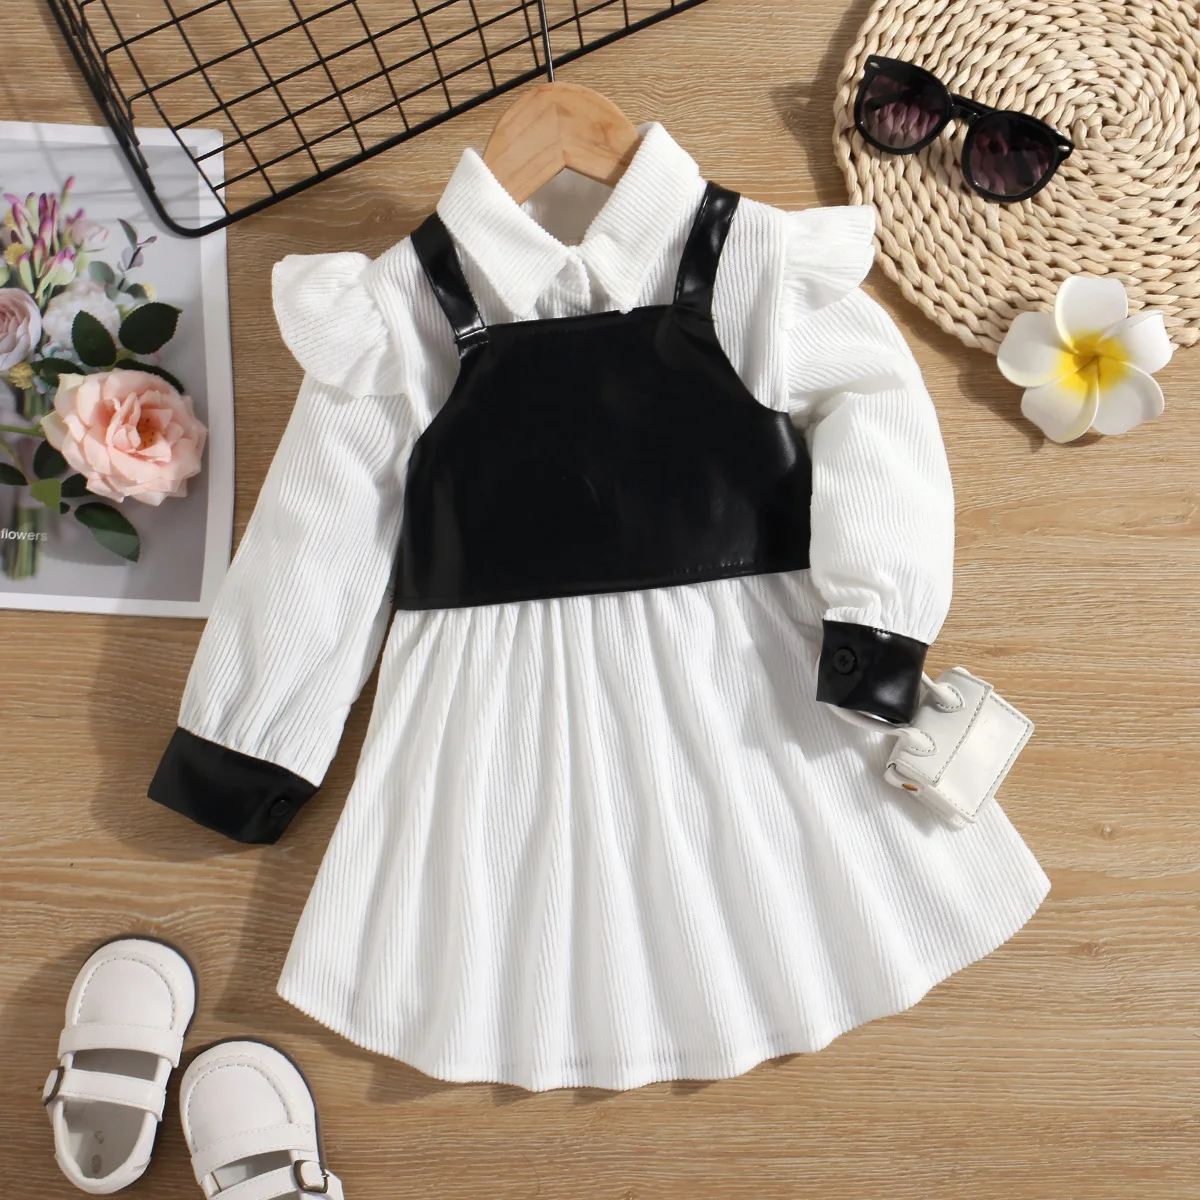 

New Year Kids Clothes Girls 2pcs Corduroy Round-neck Dresses +Black Vest Winter Spring For Sweet Gentle Children Suits 1-6 Years